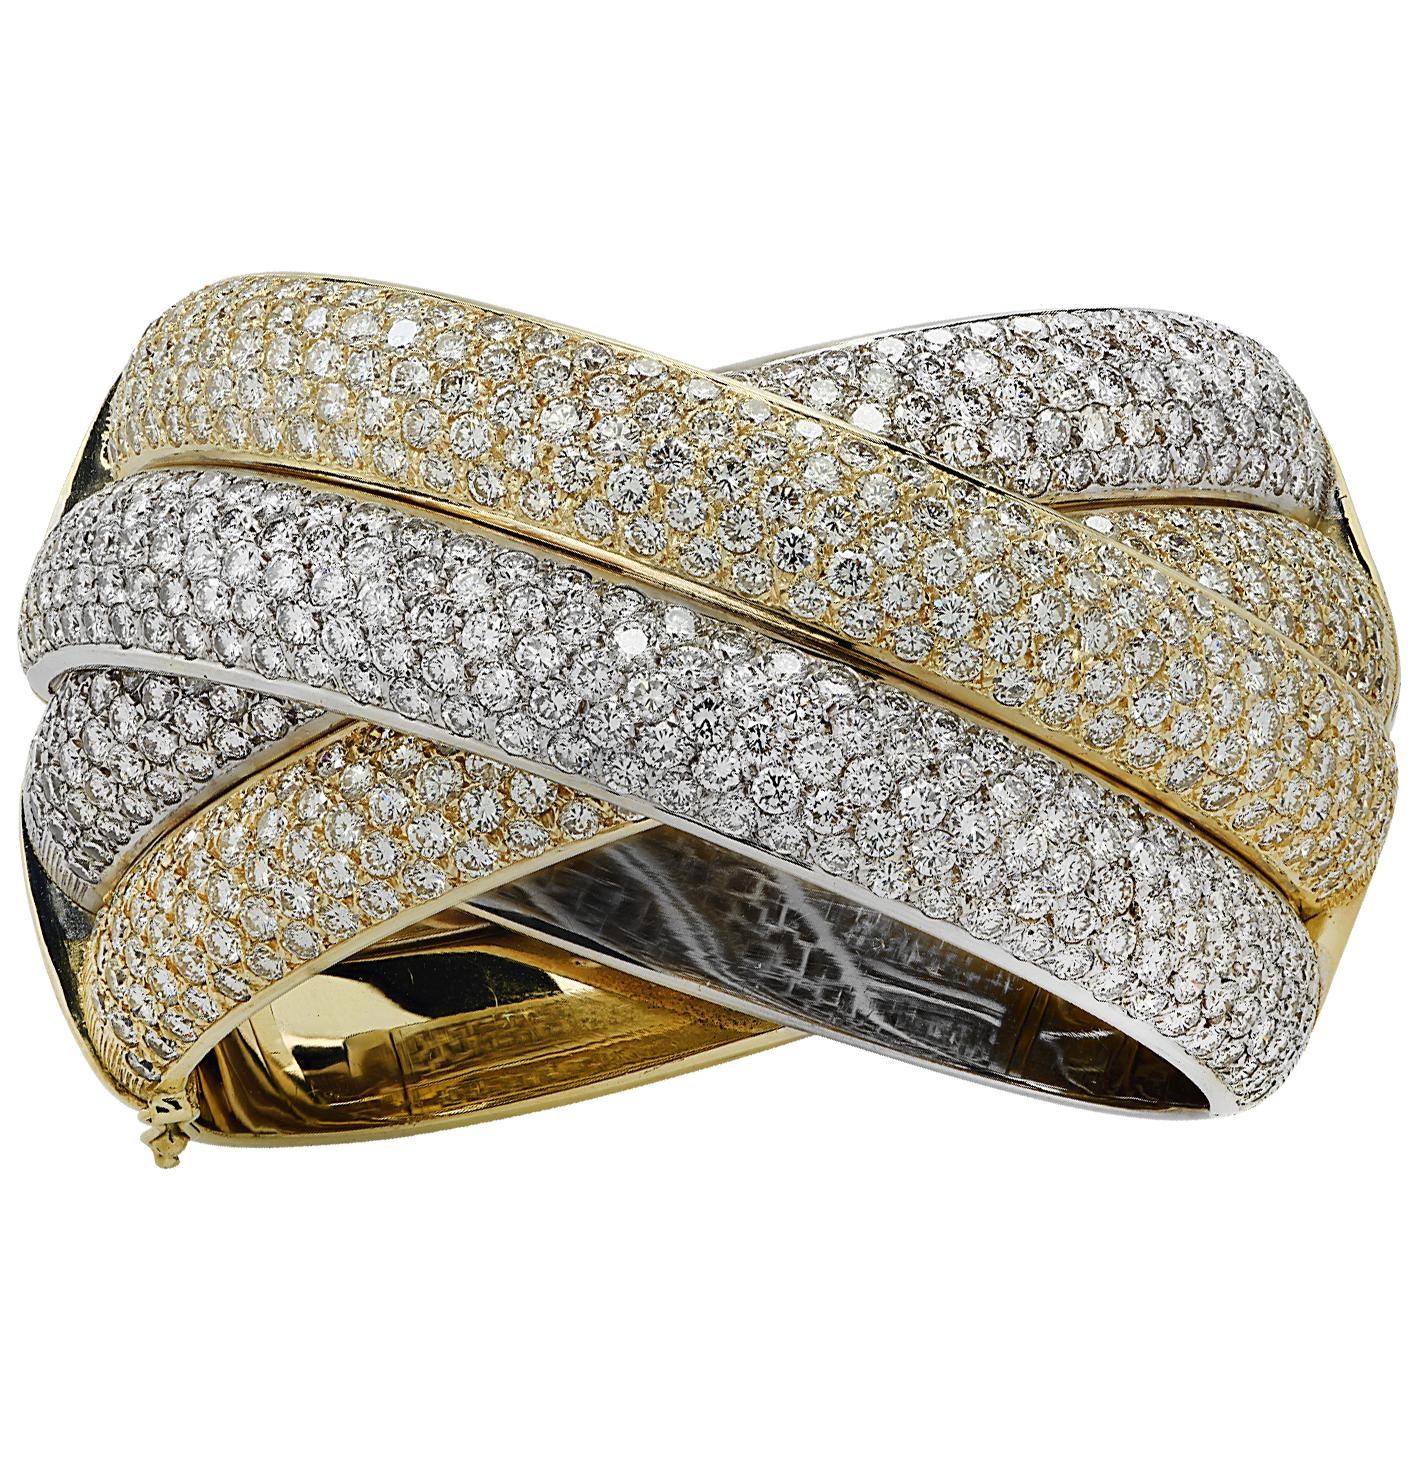 Striking diamond X bangle bracelet crafted in Italy in 18 karat yellow and white gold, featuring 692 round brilliant cut diamonds weighing approximately 31.00 carats total, F-G color, VS-SI clarity. Four diamond encrusted gold strands swirl around